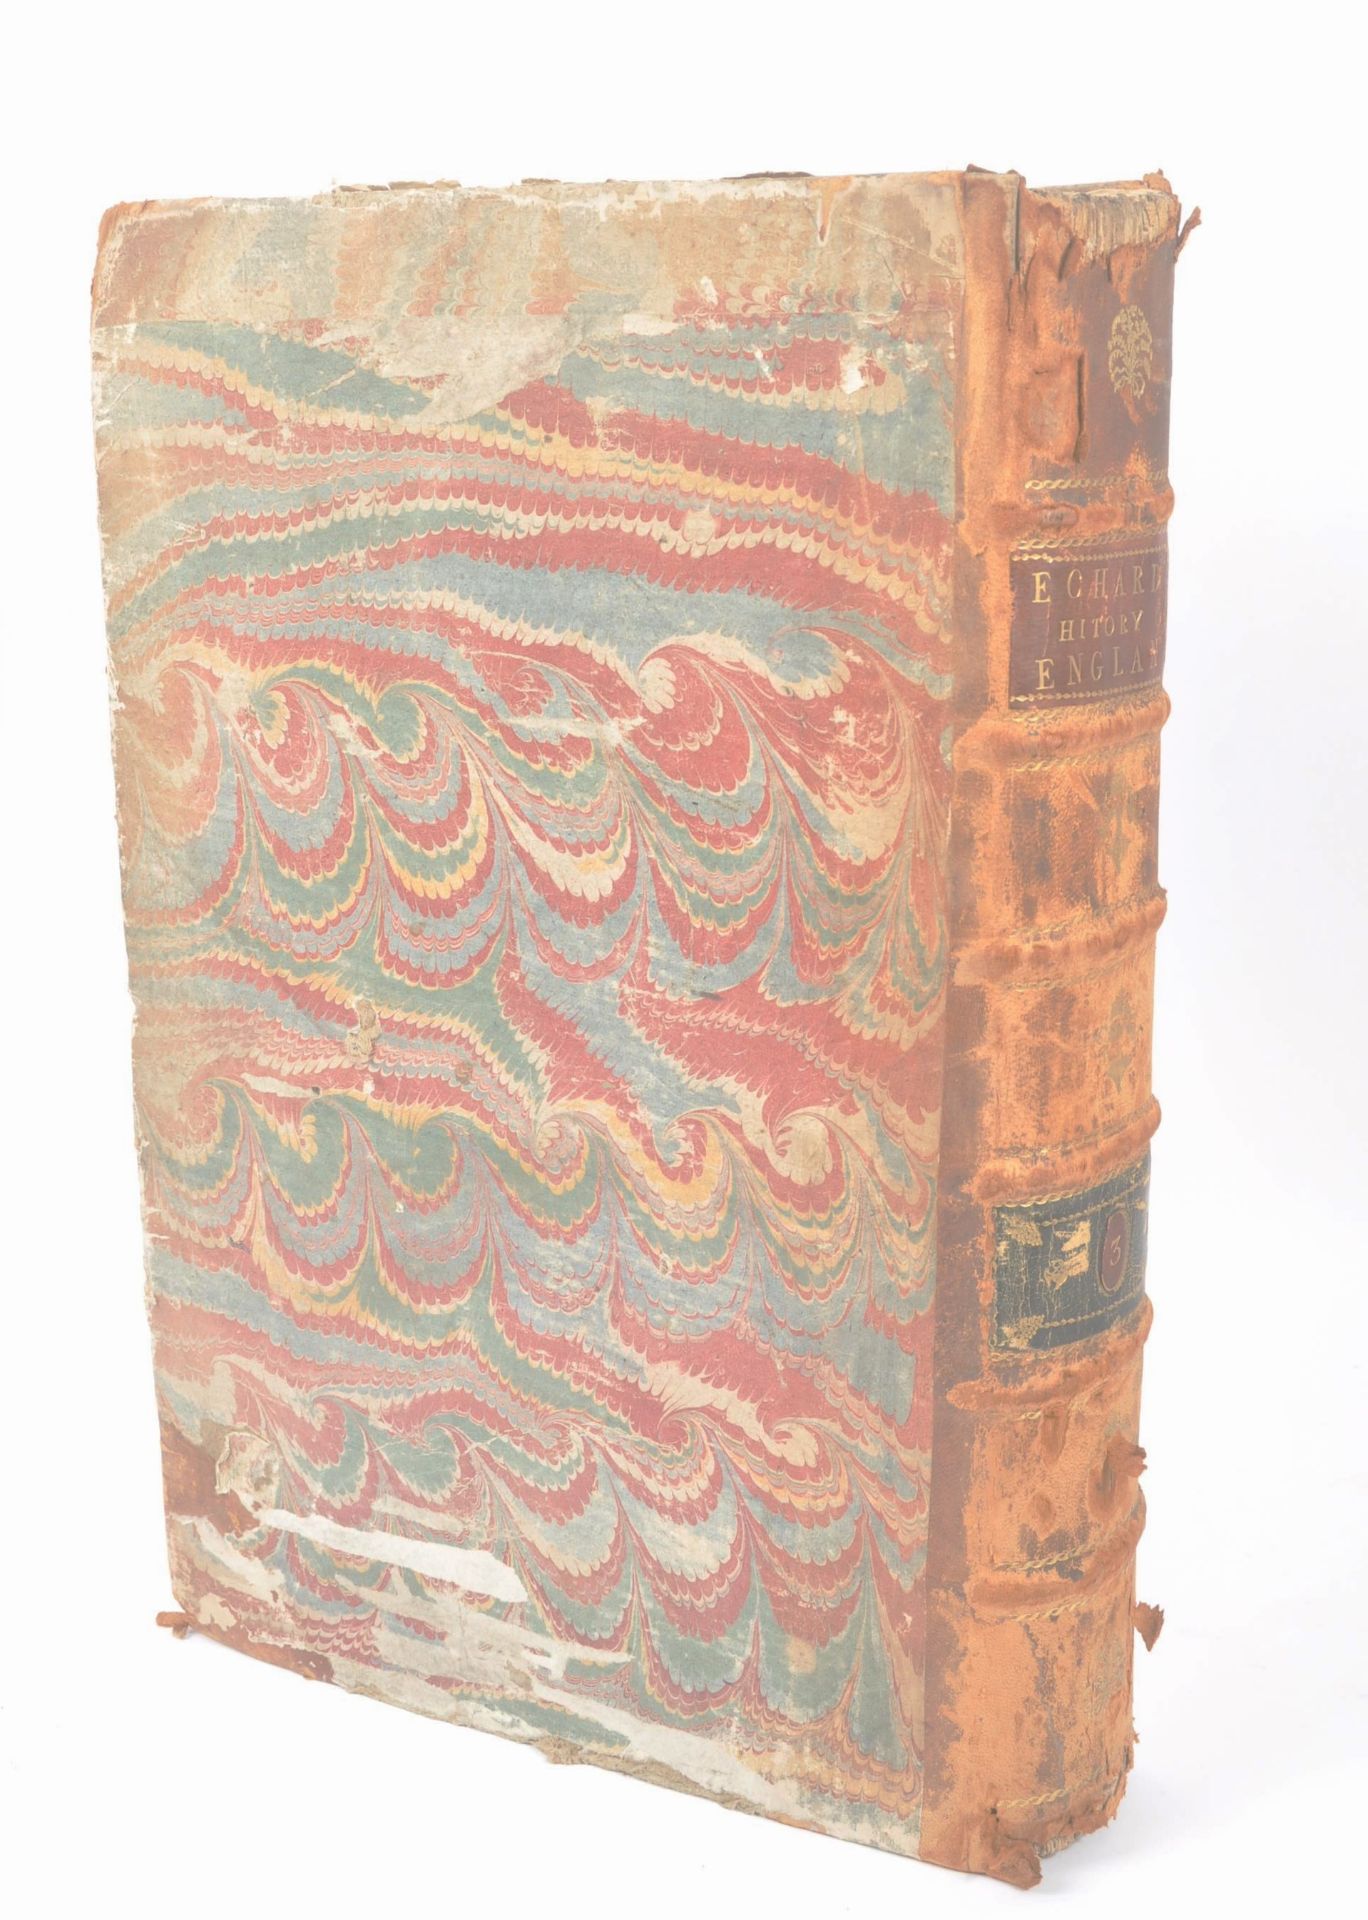 18TH CENTURY BOOK BY LAURENCE ECHARD - HISTORY OF ENGLAND - Image 4 of 6